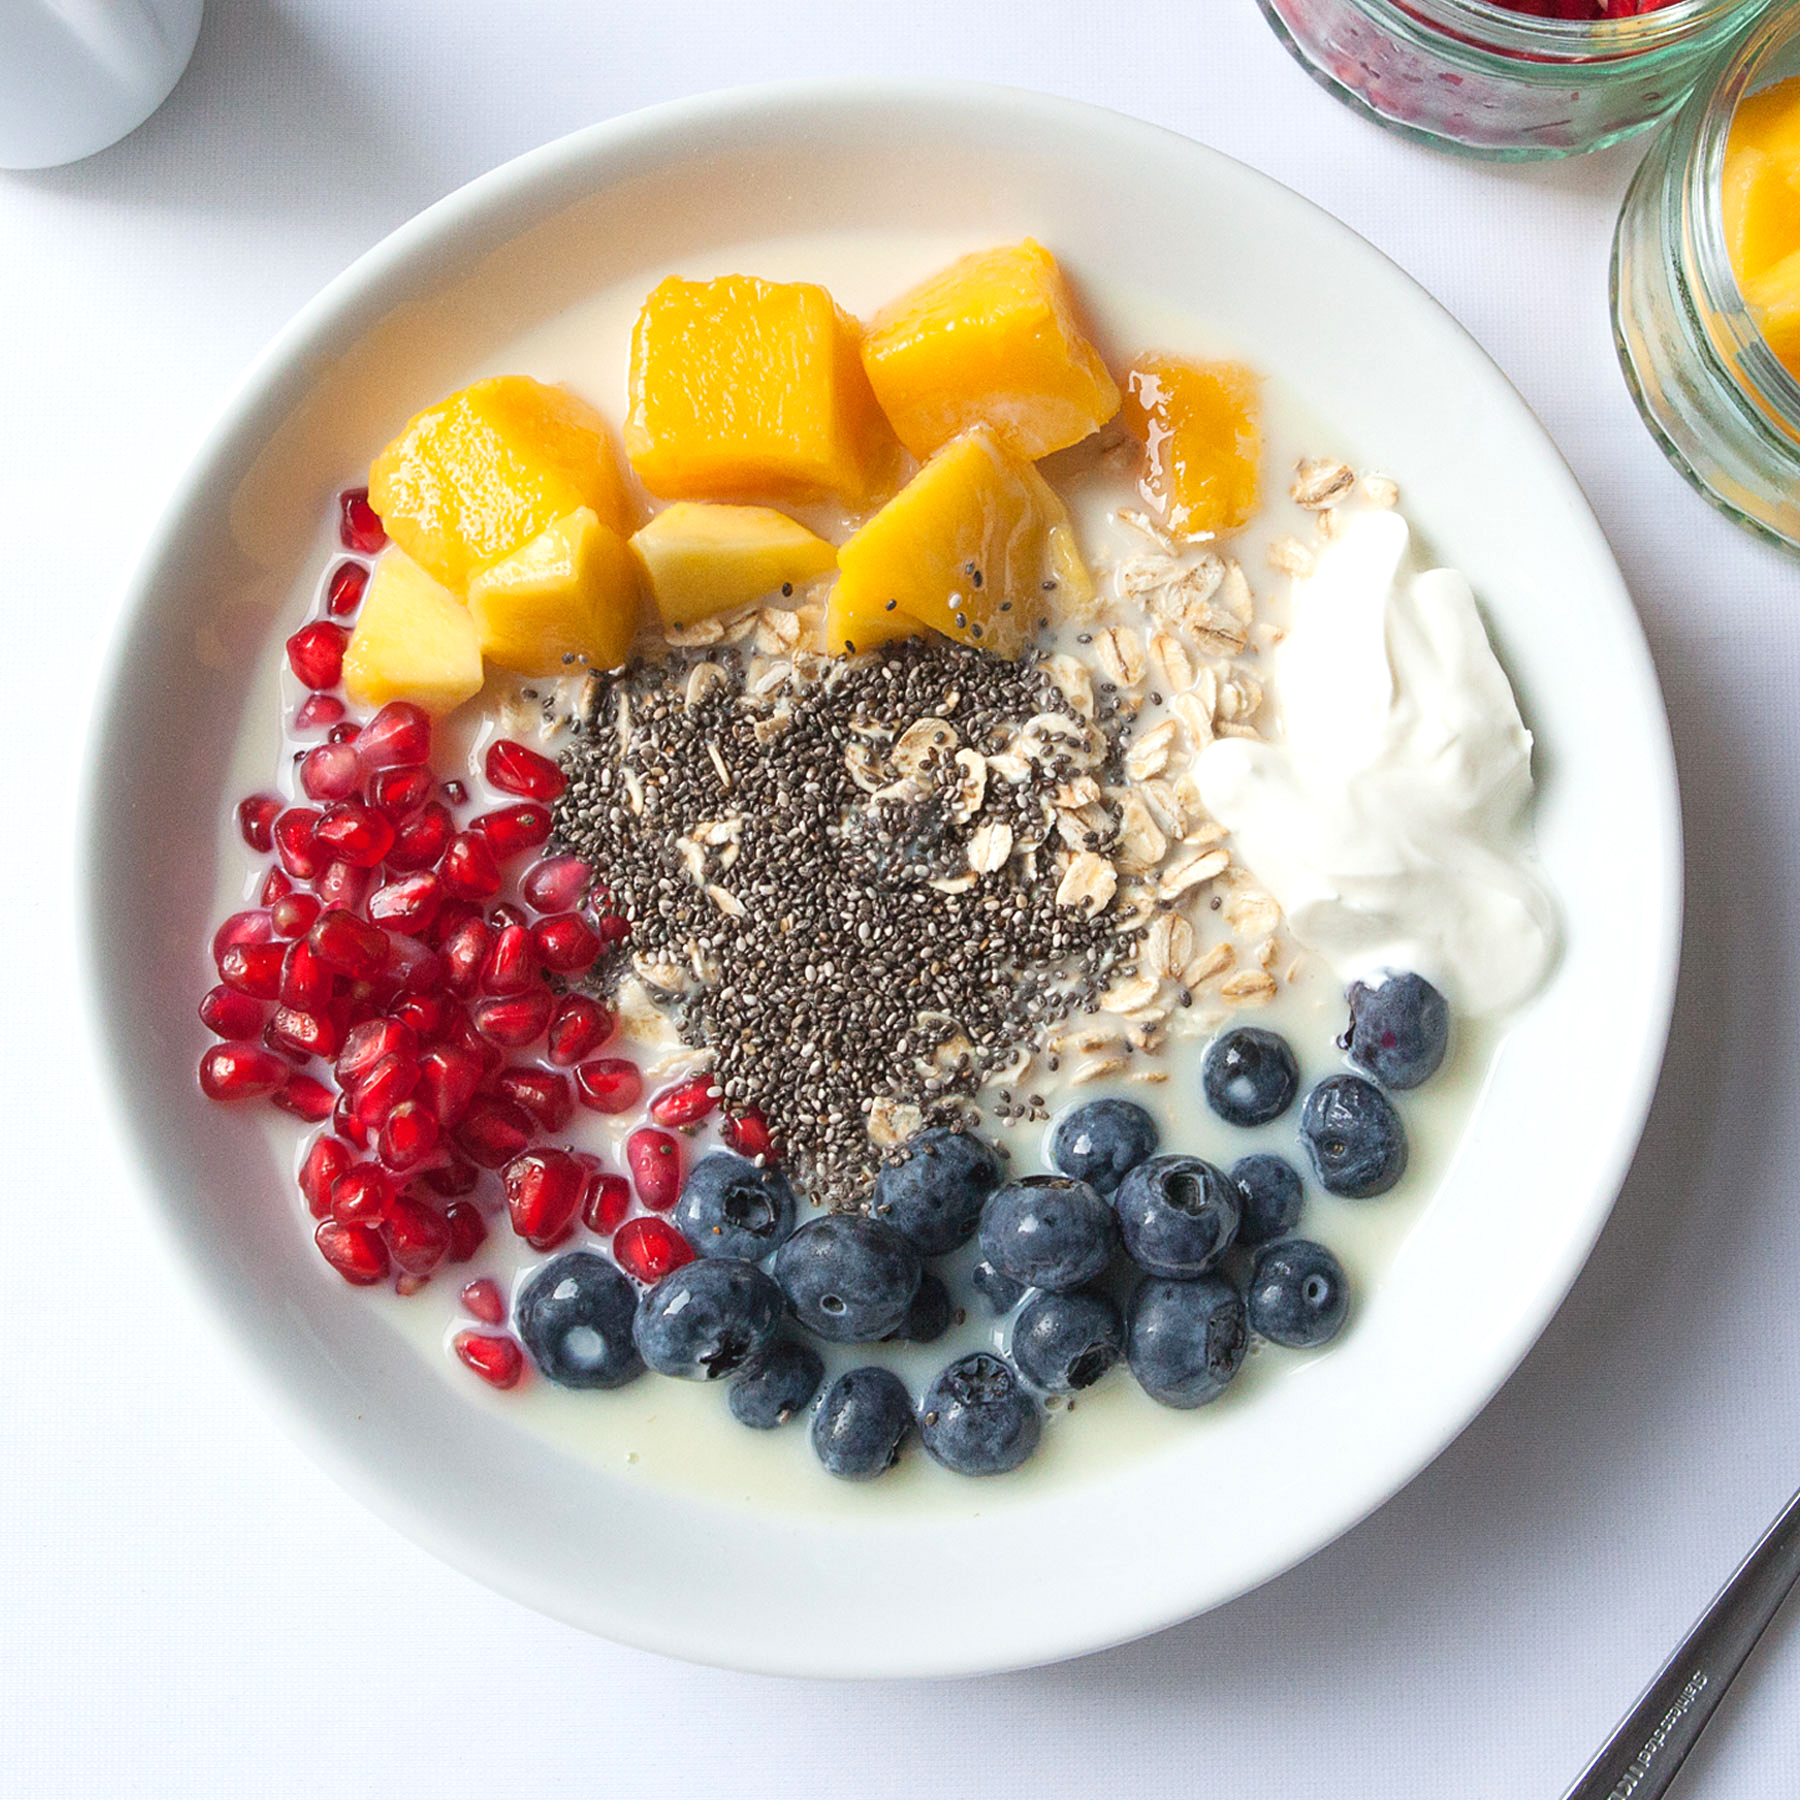 Morning Oats with Fruit | Vegan Meal Plan | Veahero